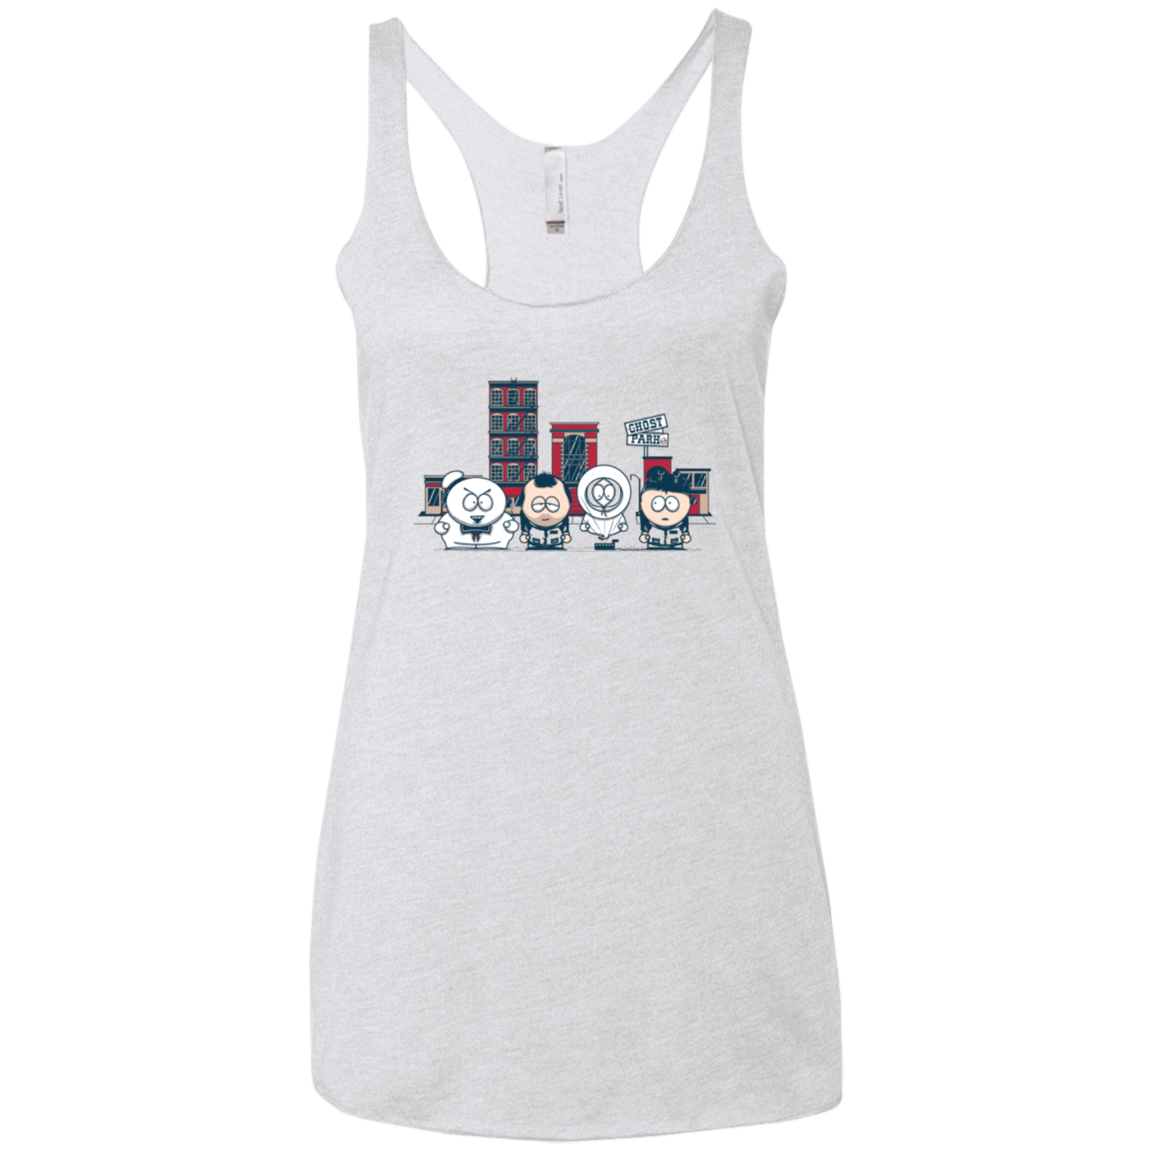 T-Shirts Heather White / X-Small GHOST PARK Women's Triblend Racerback Tank